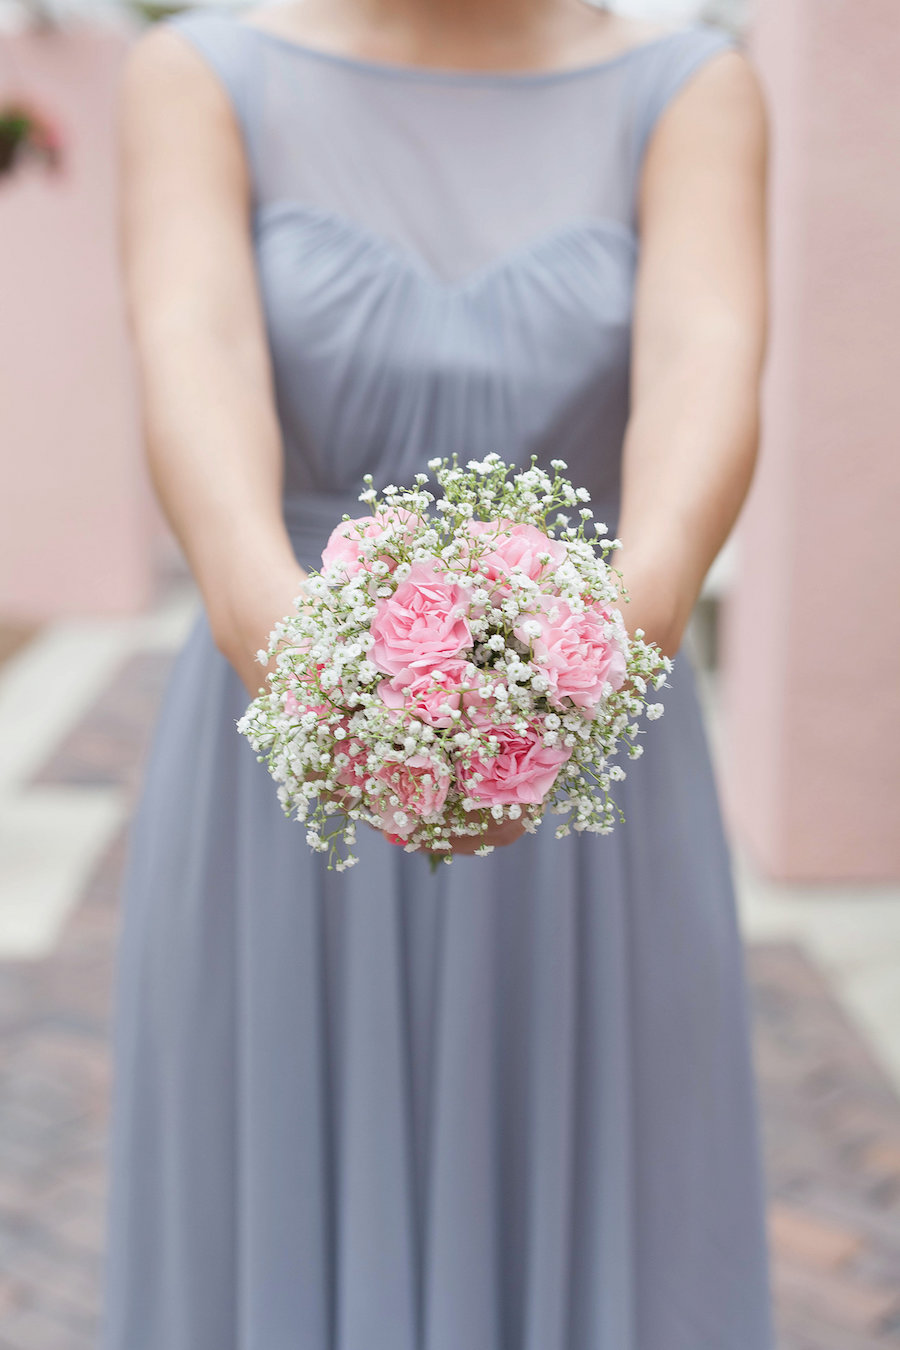 Grey Blue Bridesmaids Dress and Pink and White Wedding | St. Petersburg Wedding Photographer Kristen Marie Photography